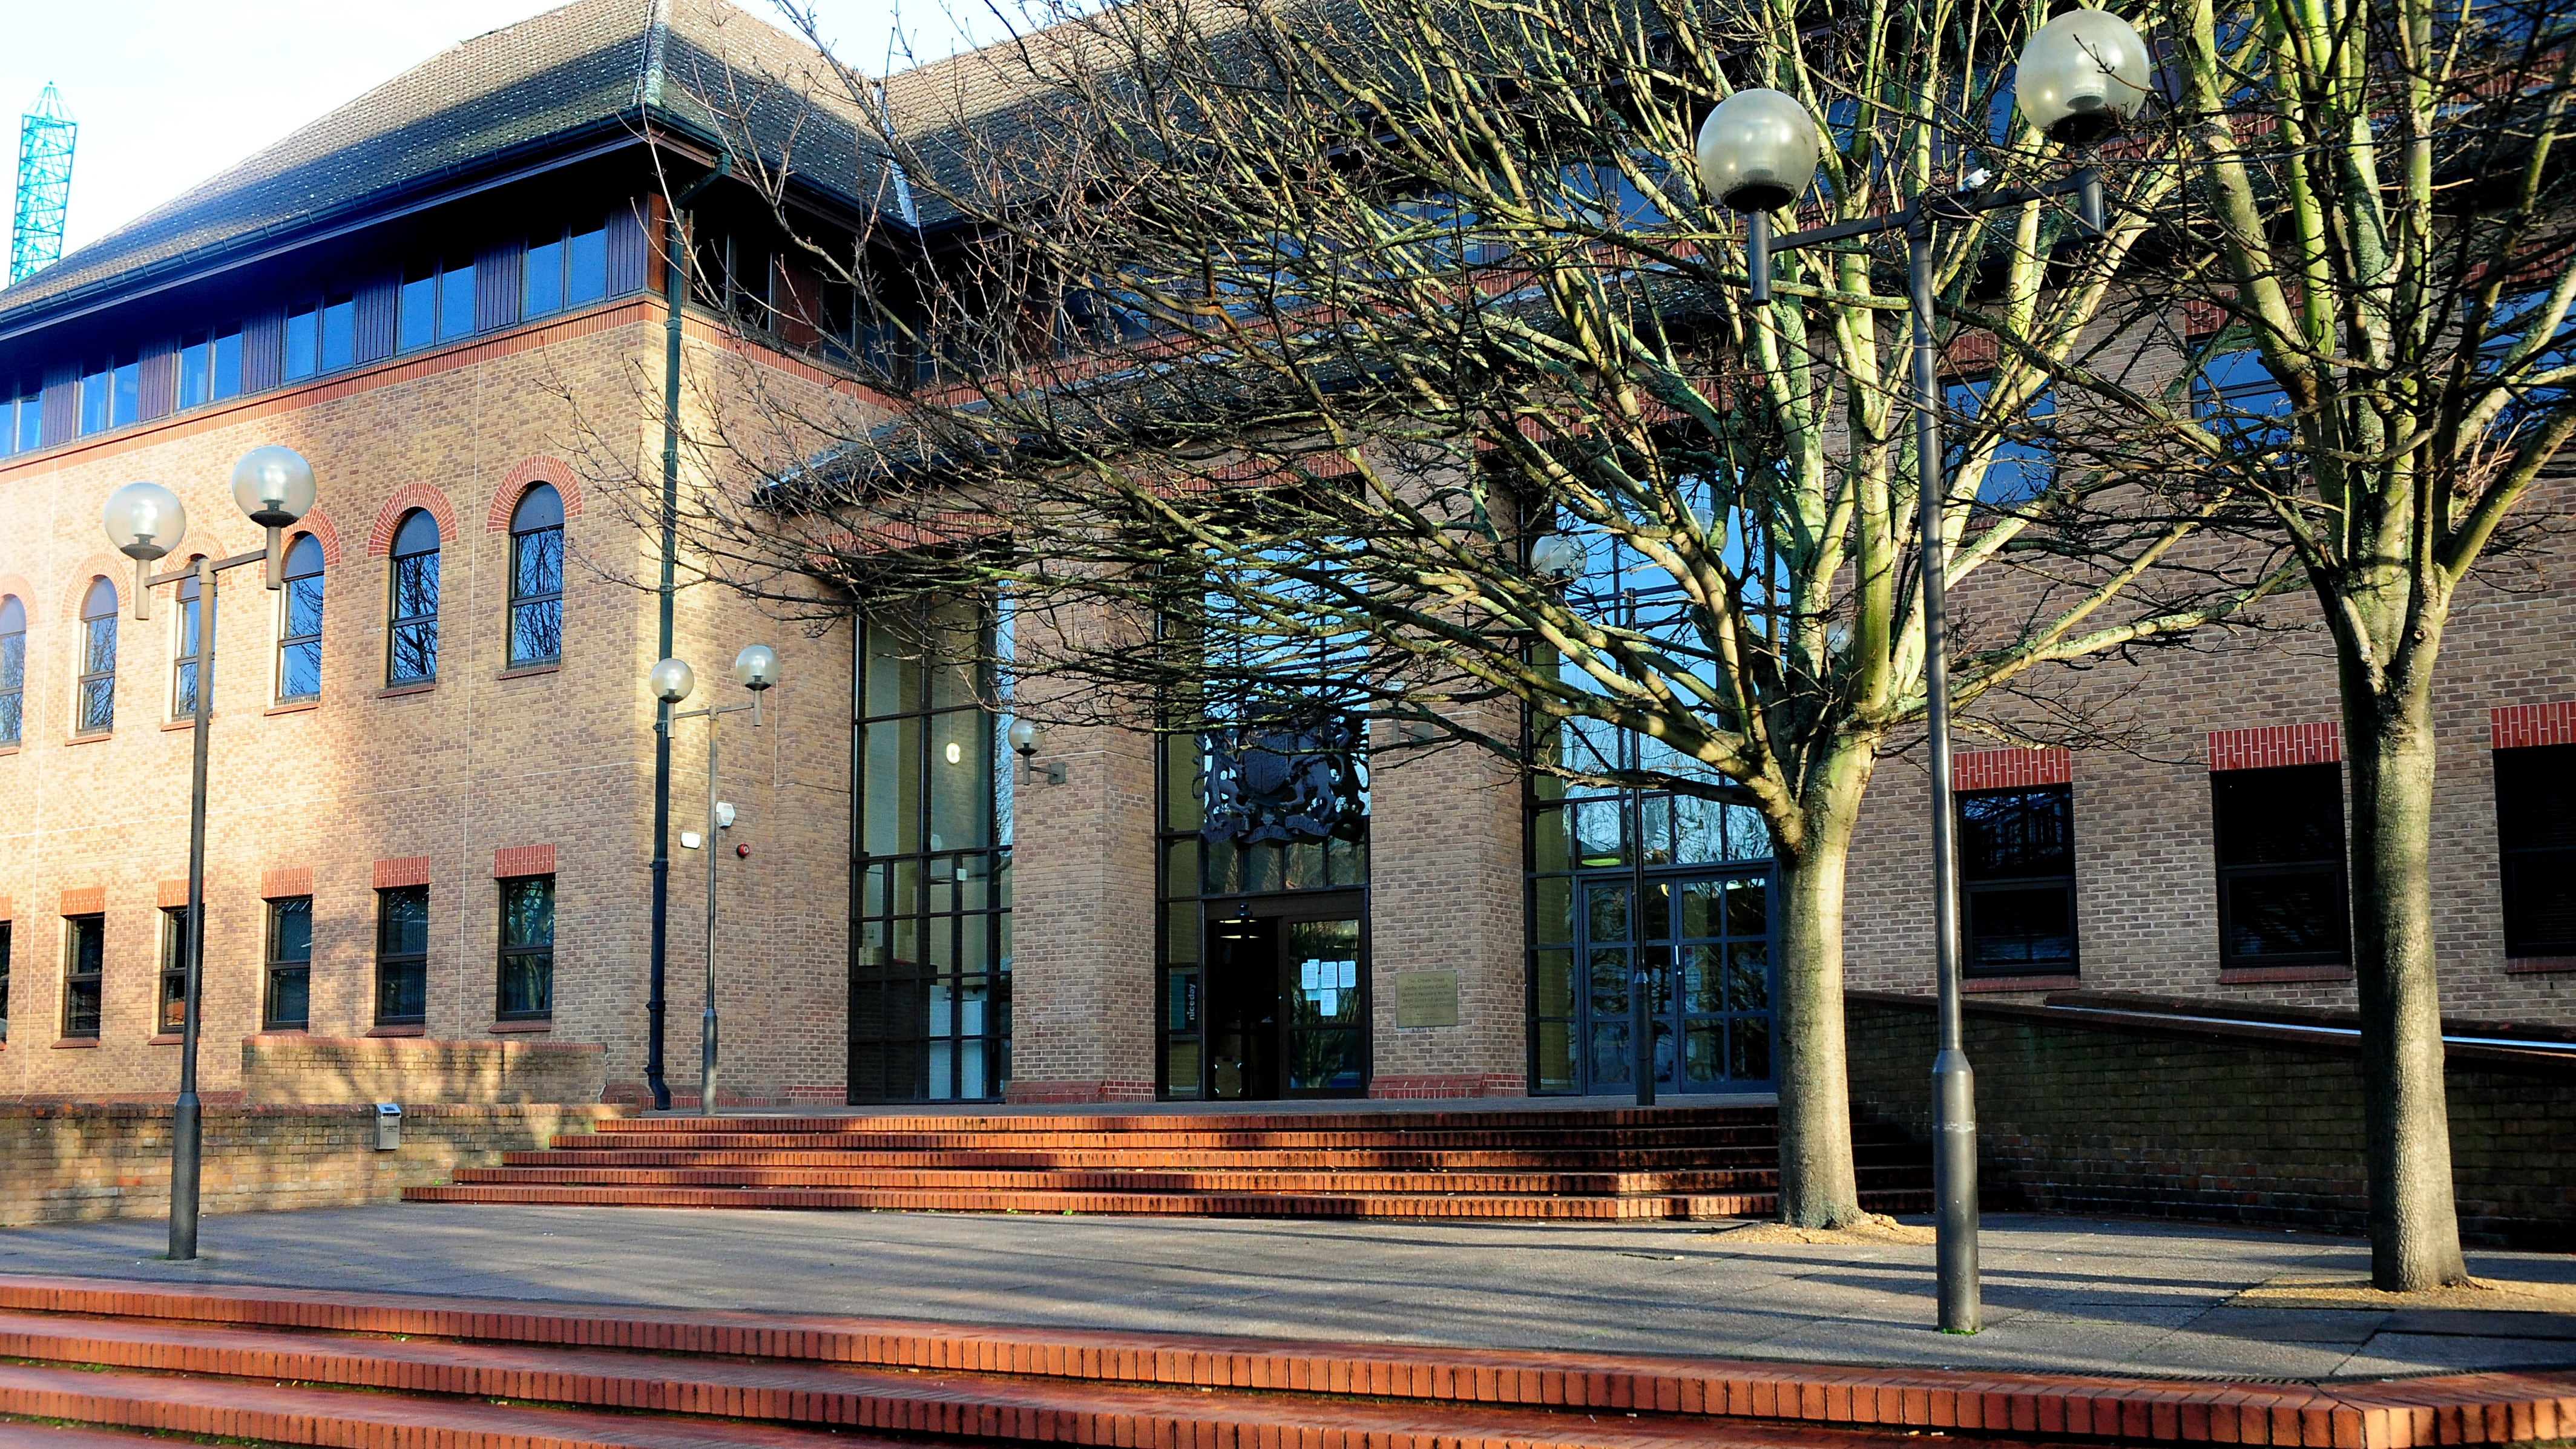 The trial continues at Derby Crown Court